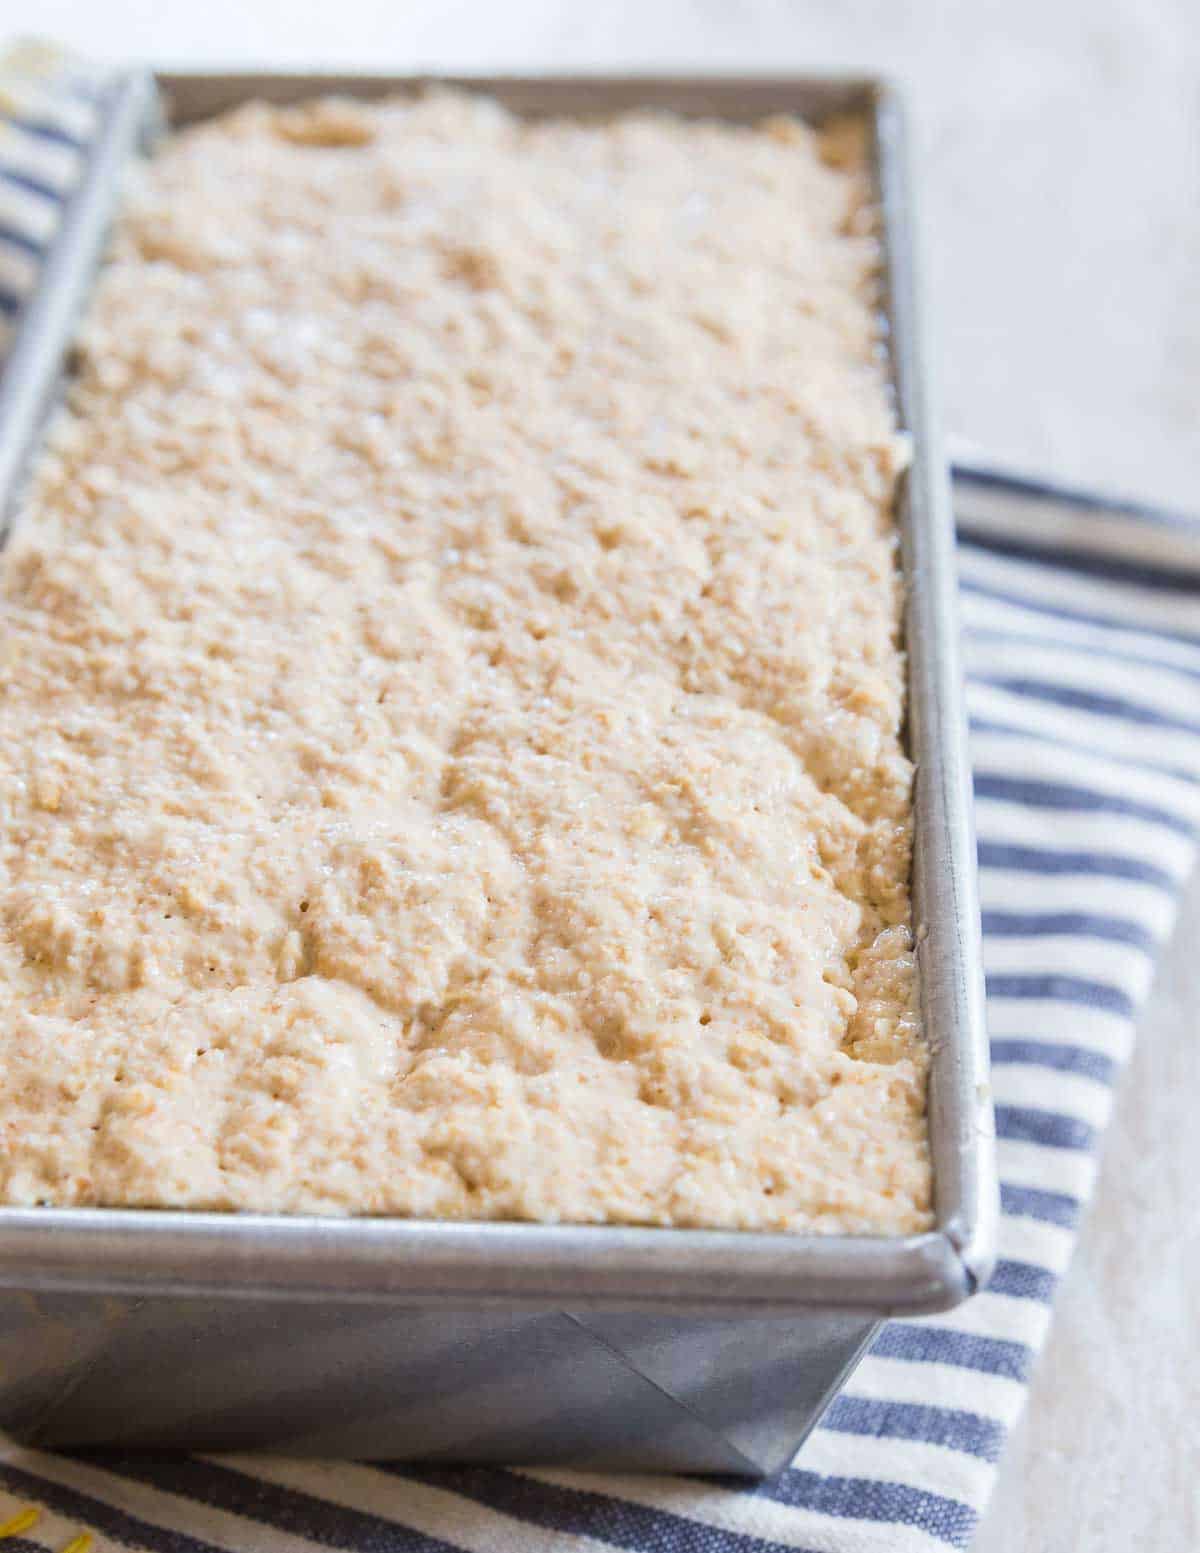 A simple yeasted oat bread recipe with just a handful of ingredients.